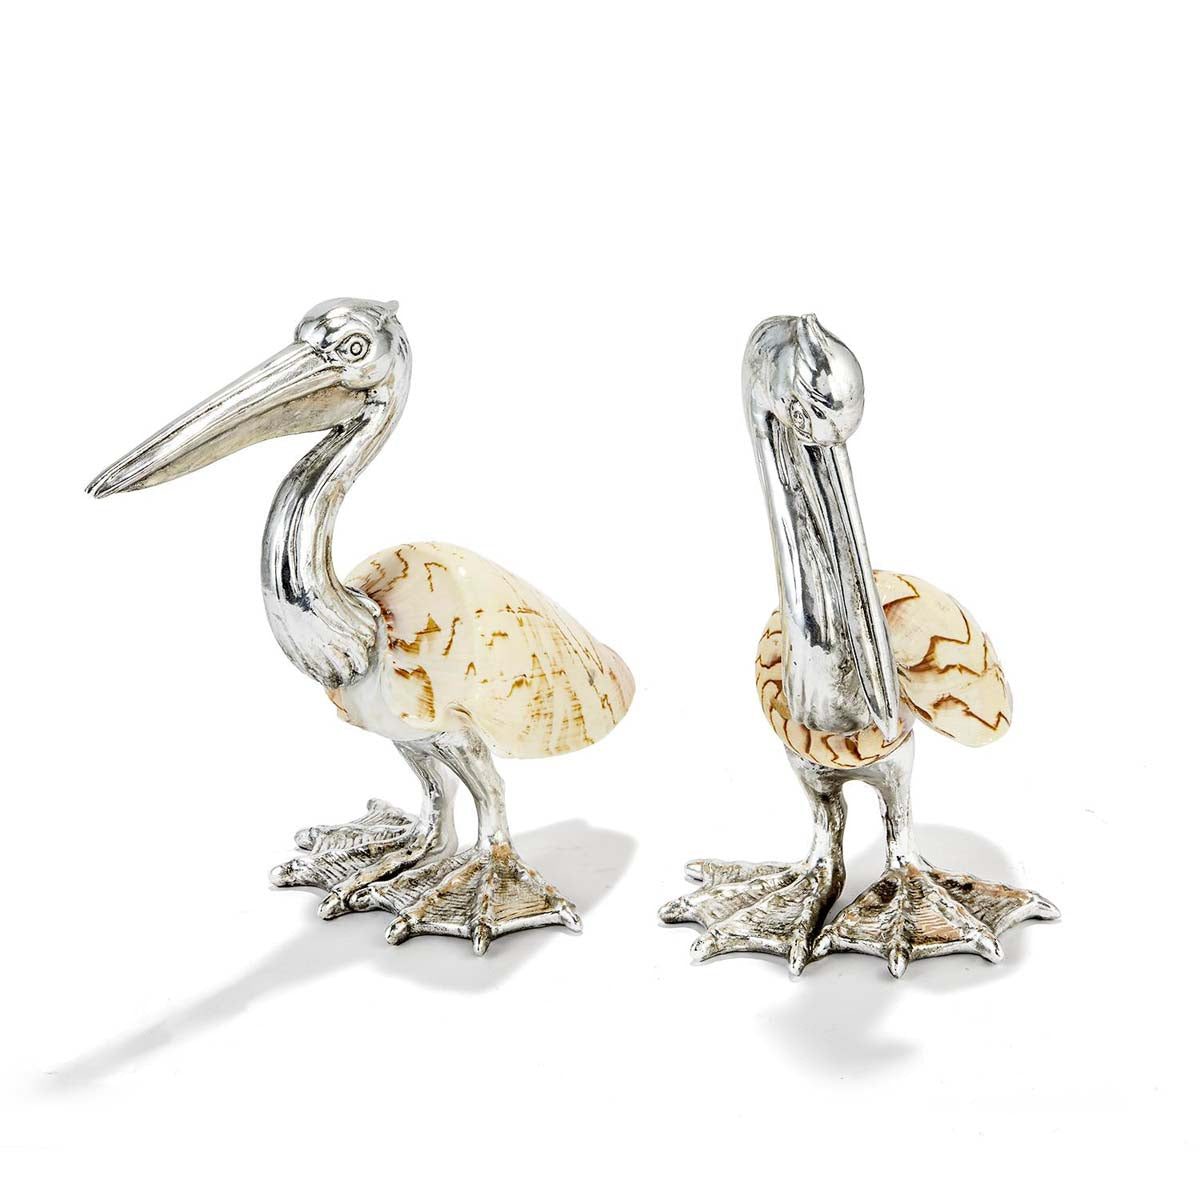 Two's Company Shell Sculpture Pelicans - Silver-Plated Resin/Cymbiola Nobilis Shell (set of 2)